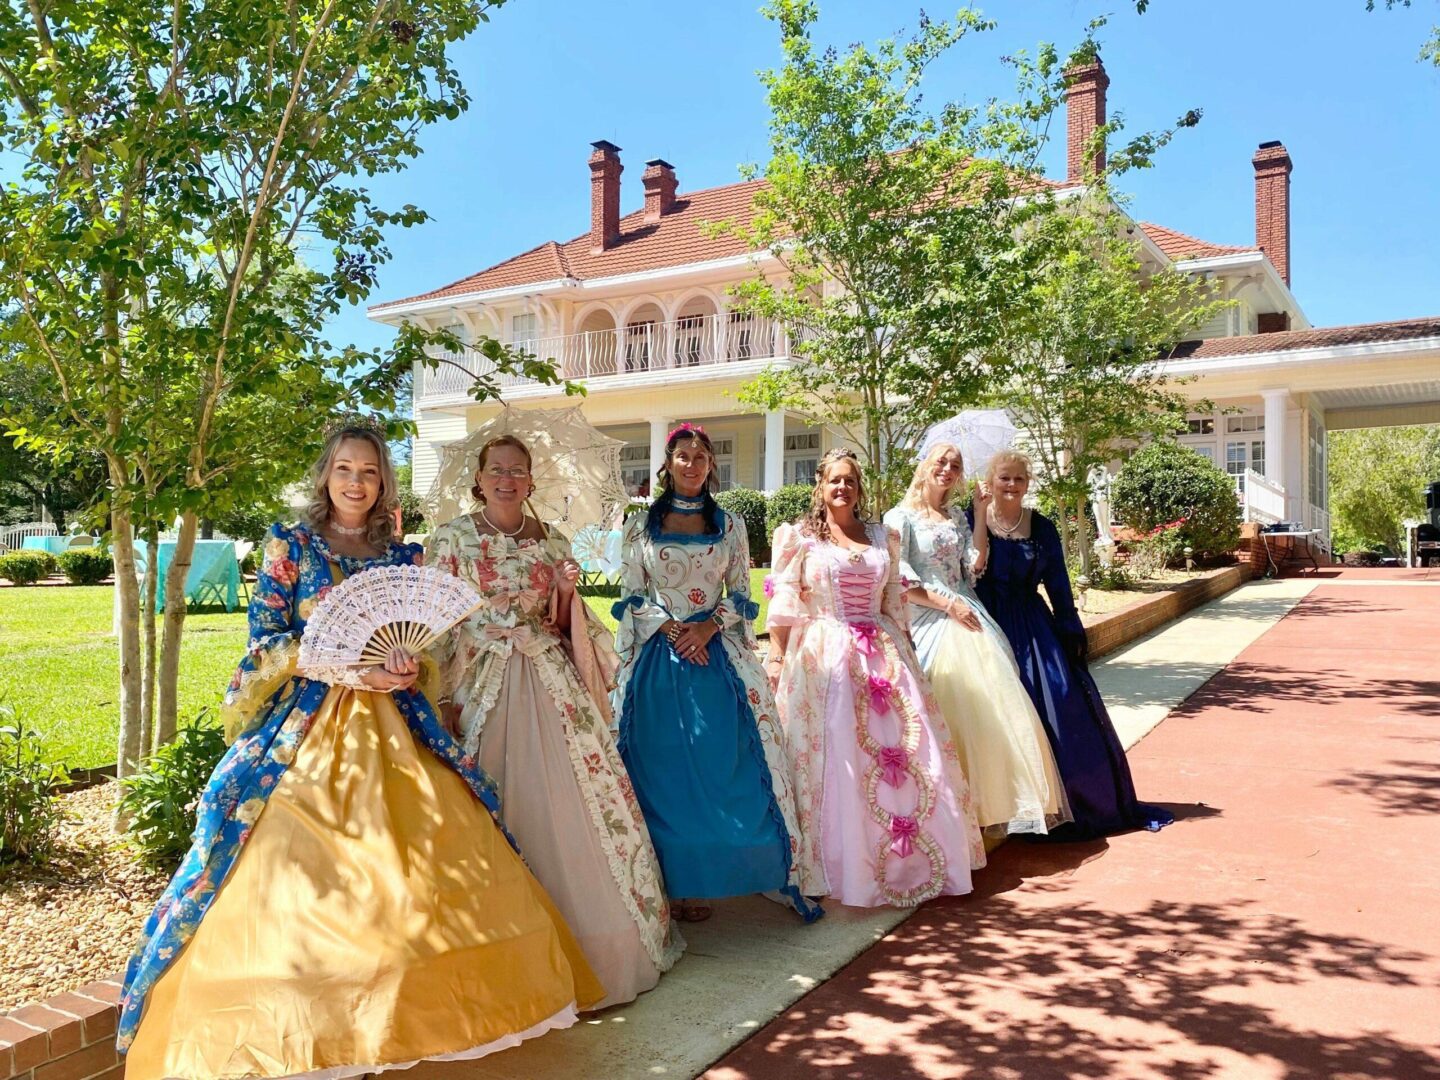 DMH Foundation tea party raises funds, gives guests glimpse of historical landmark